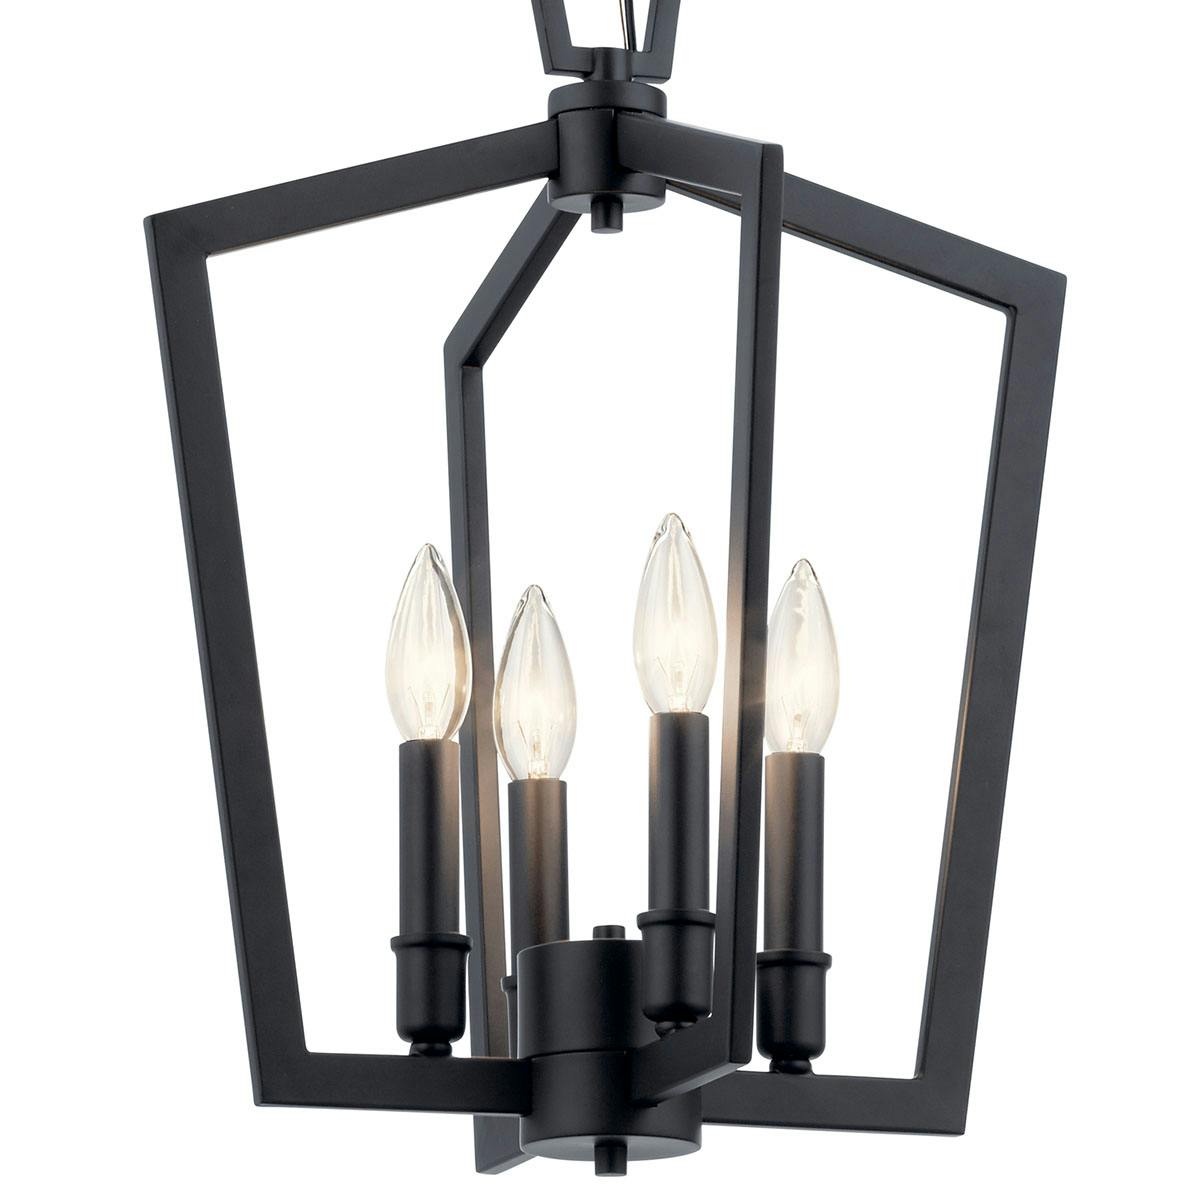 Close up view of the Abbotswell 19" 4 Light Pendant Black on a white background